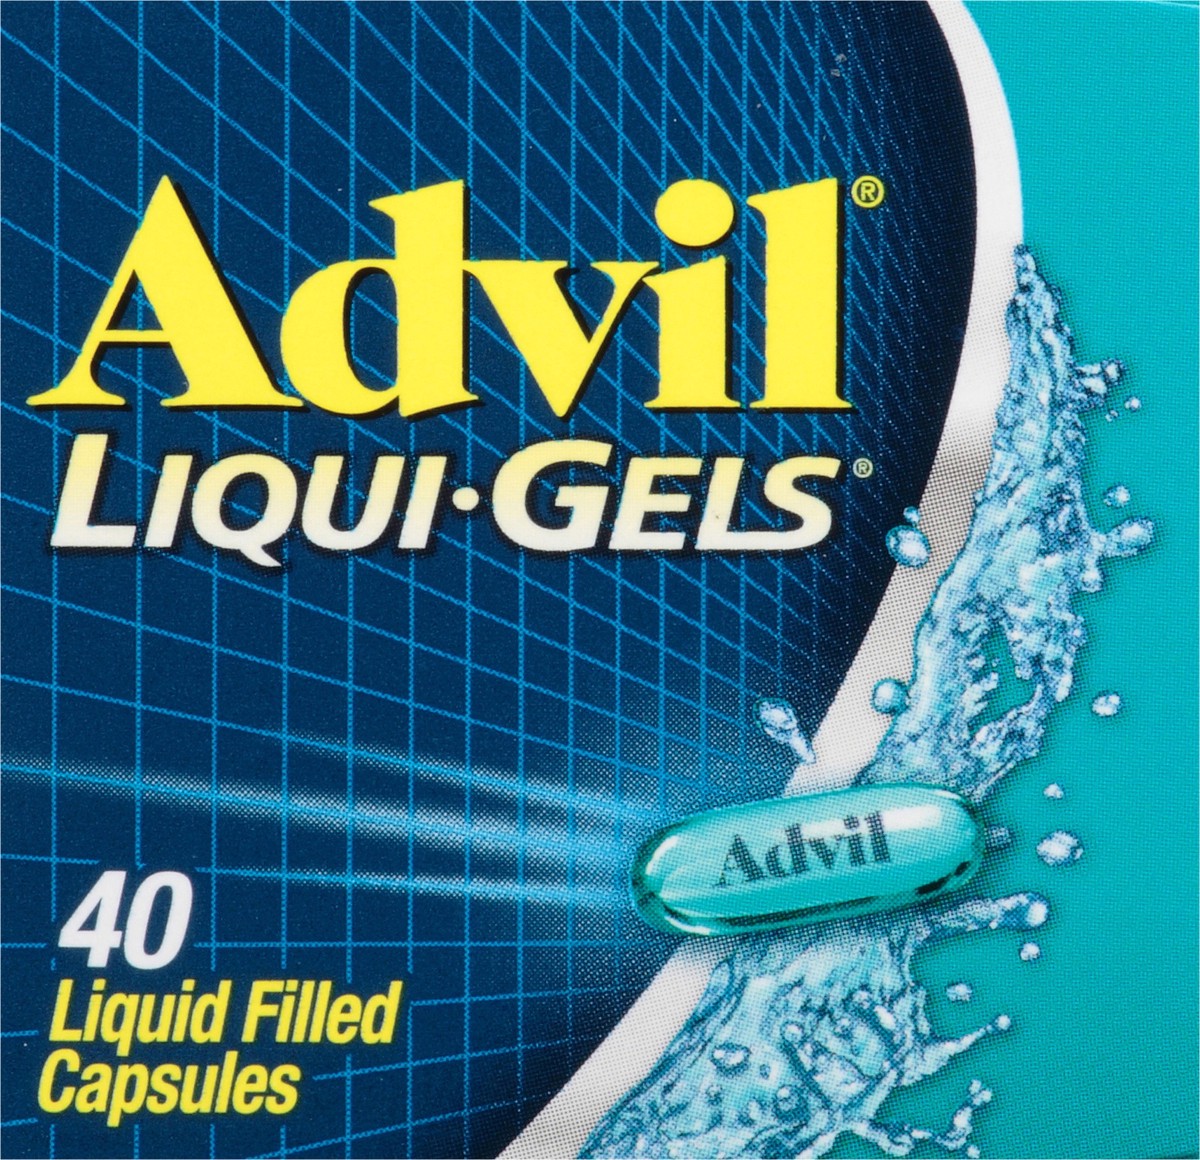 slide 7 of 9, Advil Liqui-Gels Pain Reliever and Fever Reducer, Ibuprofen 200mg for Pain Relief - 40 Liquid Filled Capsules, 40 ct